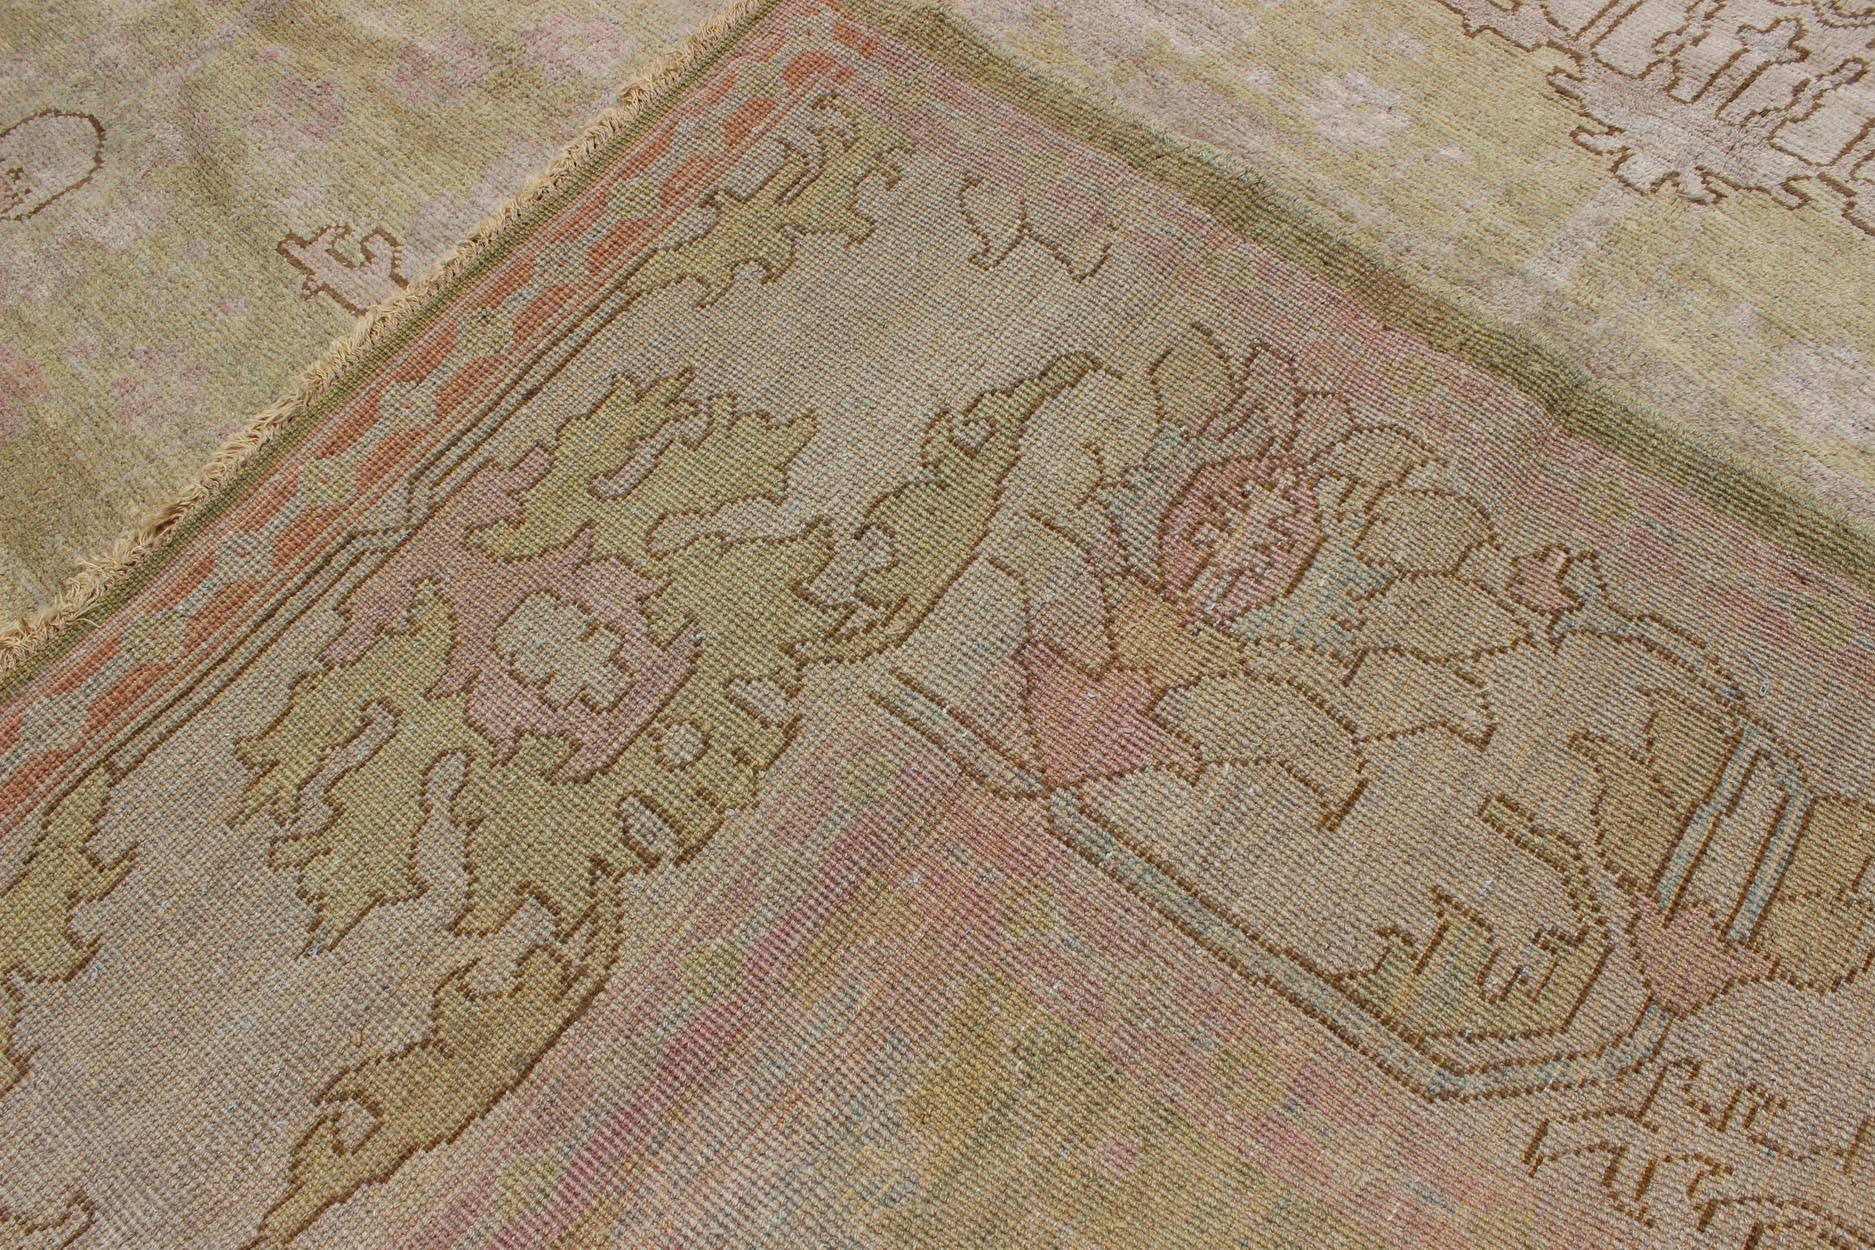 Late 20th Century Arts & Crafts Design Vintage Rug with Light Acid Green, Blush, Pink and Brown